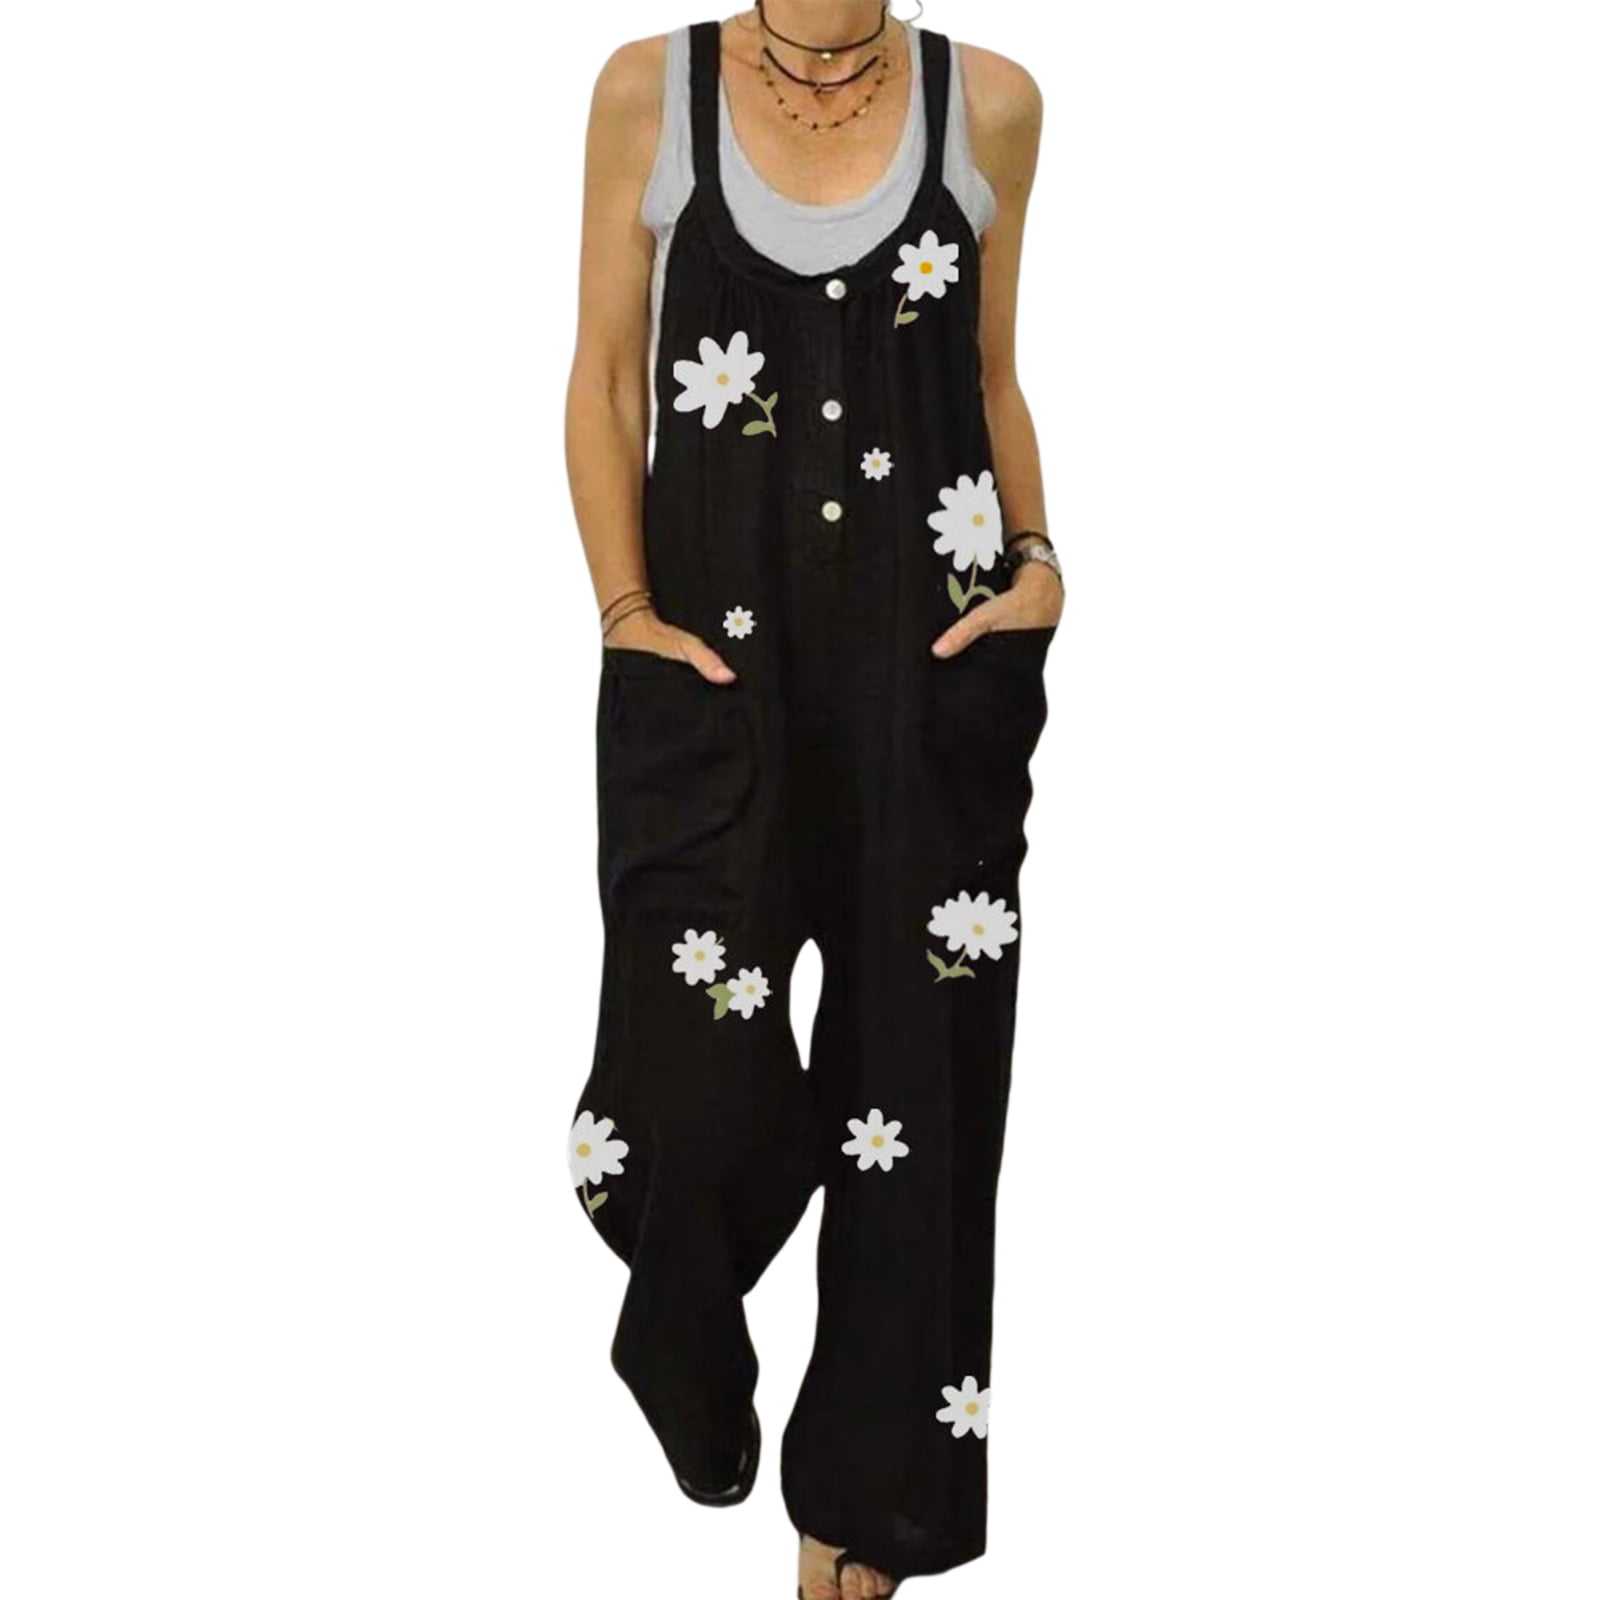 Womens Overalls Loose Fit Fashion Boho Casual Work Beach Vintage Y2K 90s Baggy Pants Wide Leg Rompers Jumpsuits